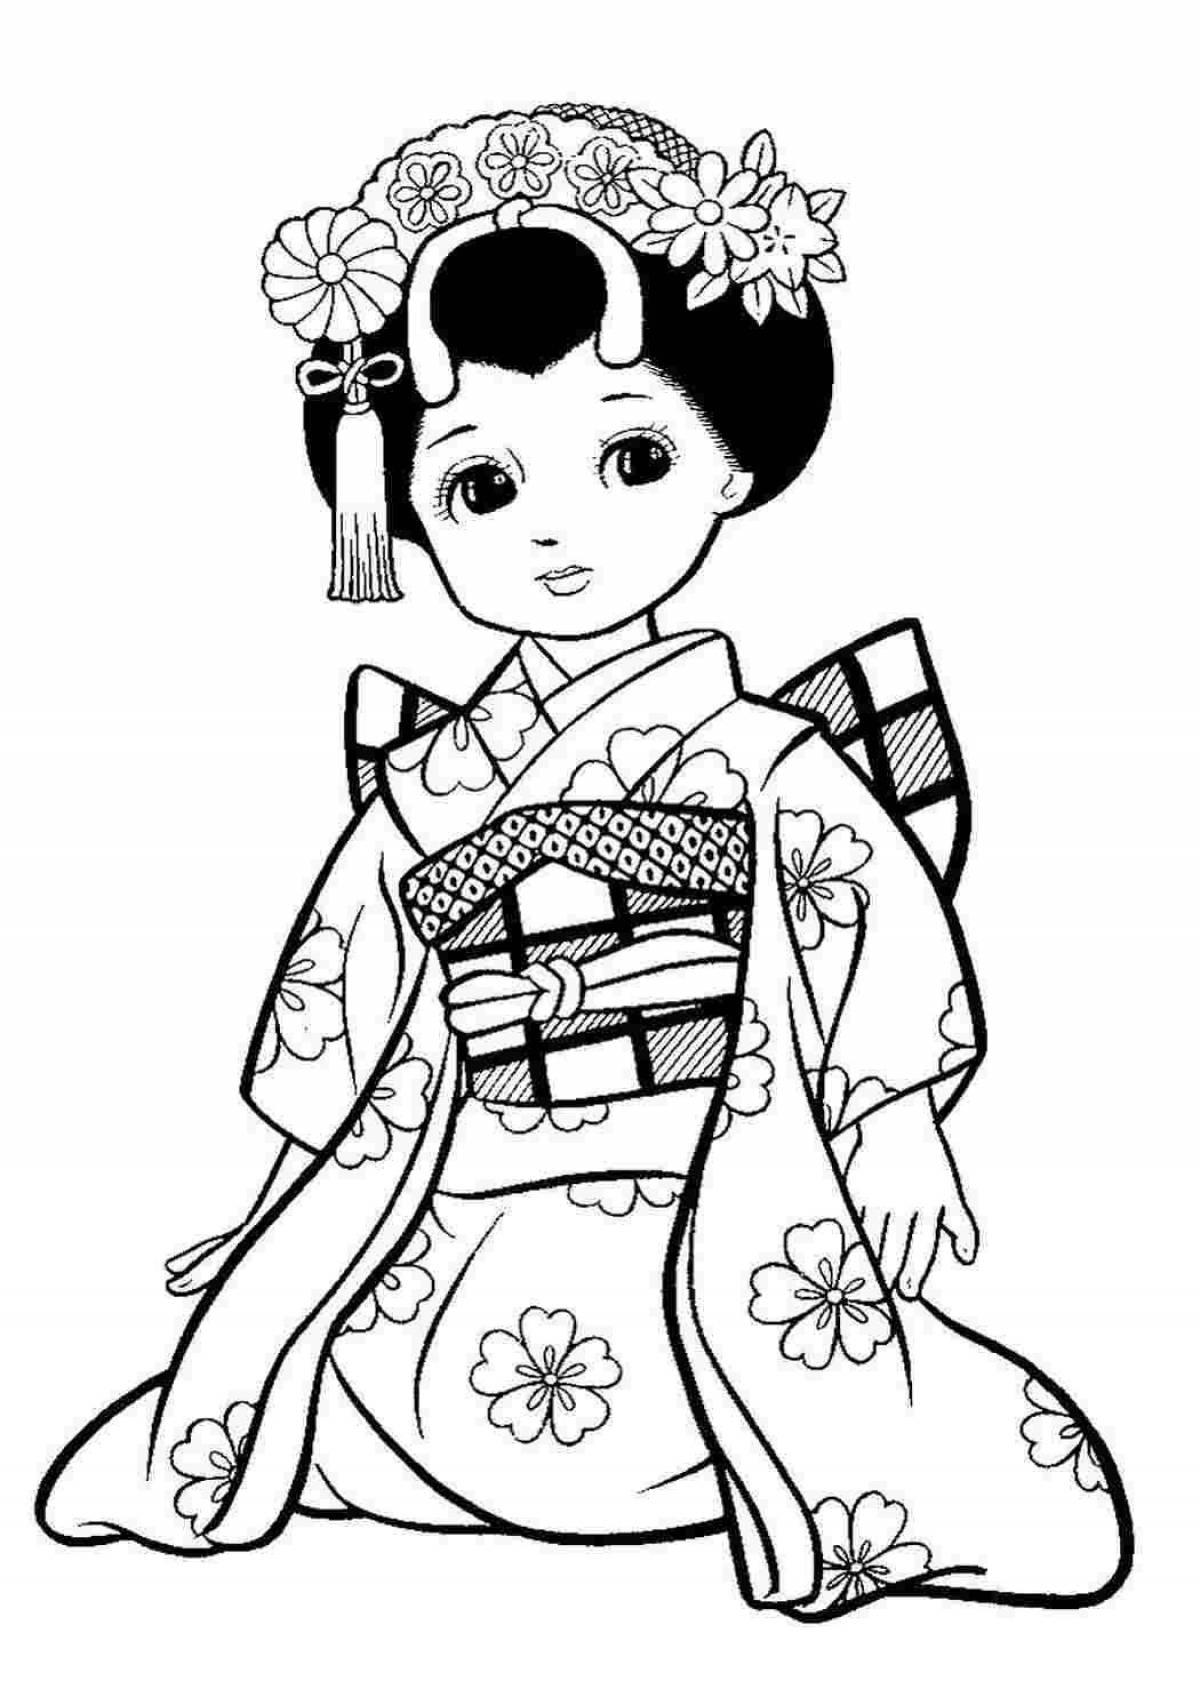 Coloring book cheerful Japanese woman